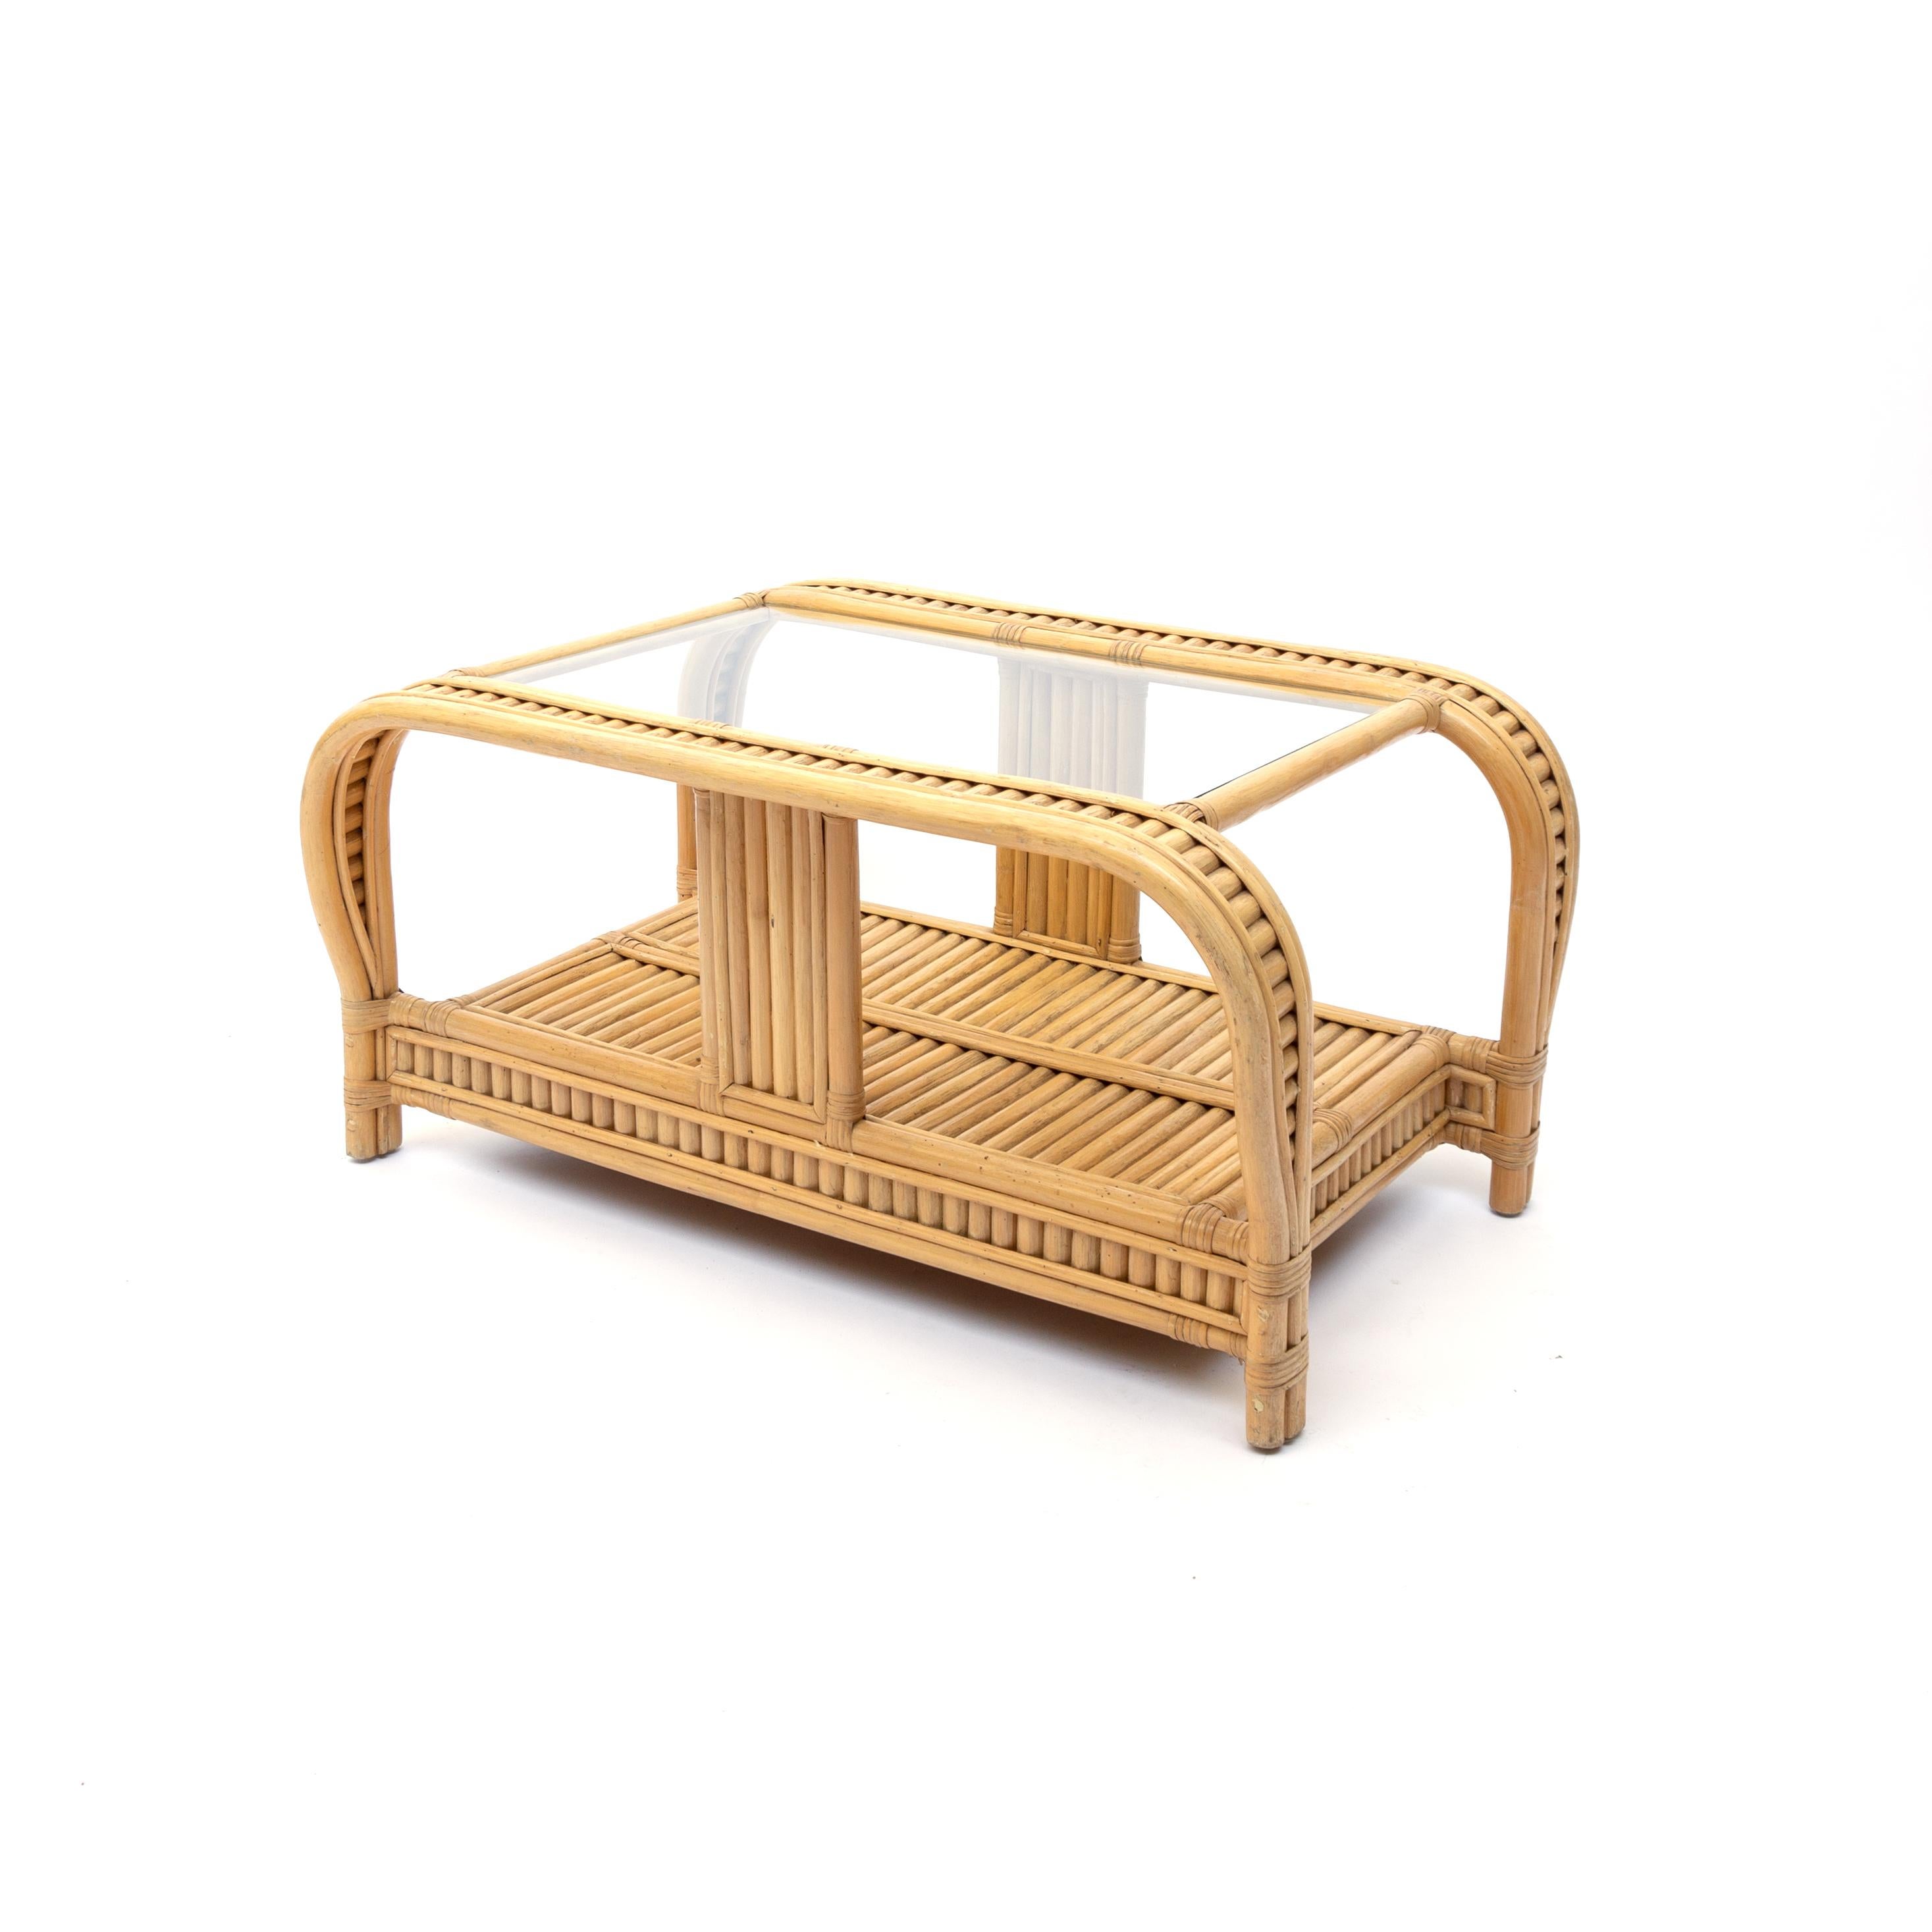 Made circa 1970s, this 3-pole rattan coffee table has an unusual bent rattan round sides carrying the glass top. The 3 rattan poles are stacked together in a double C-shape. The glass top rests on it, exuding an almost floating quality. 